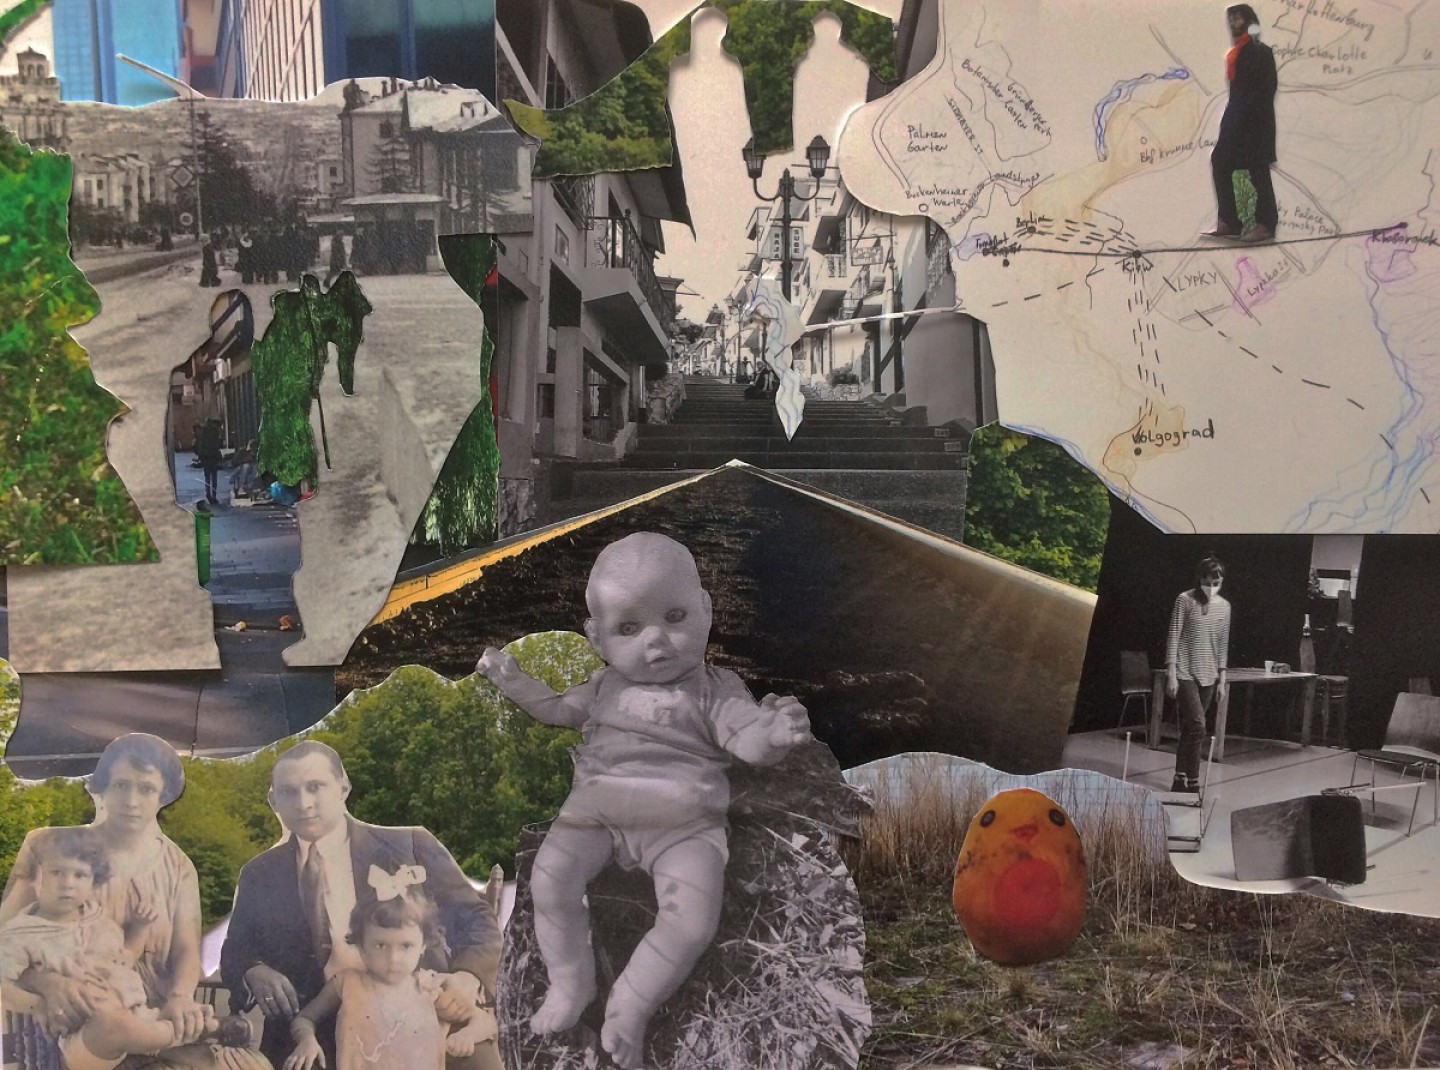 Collage by Olga Popova_Daydreaming the Archive - Kopie